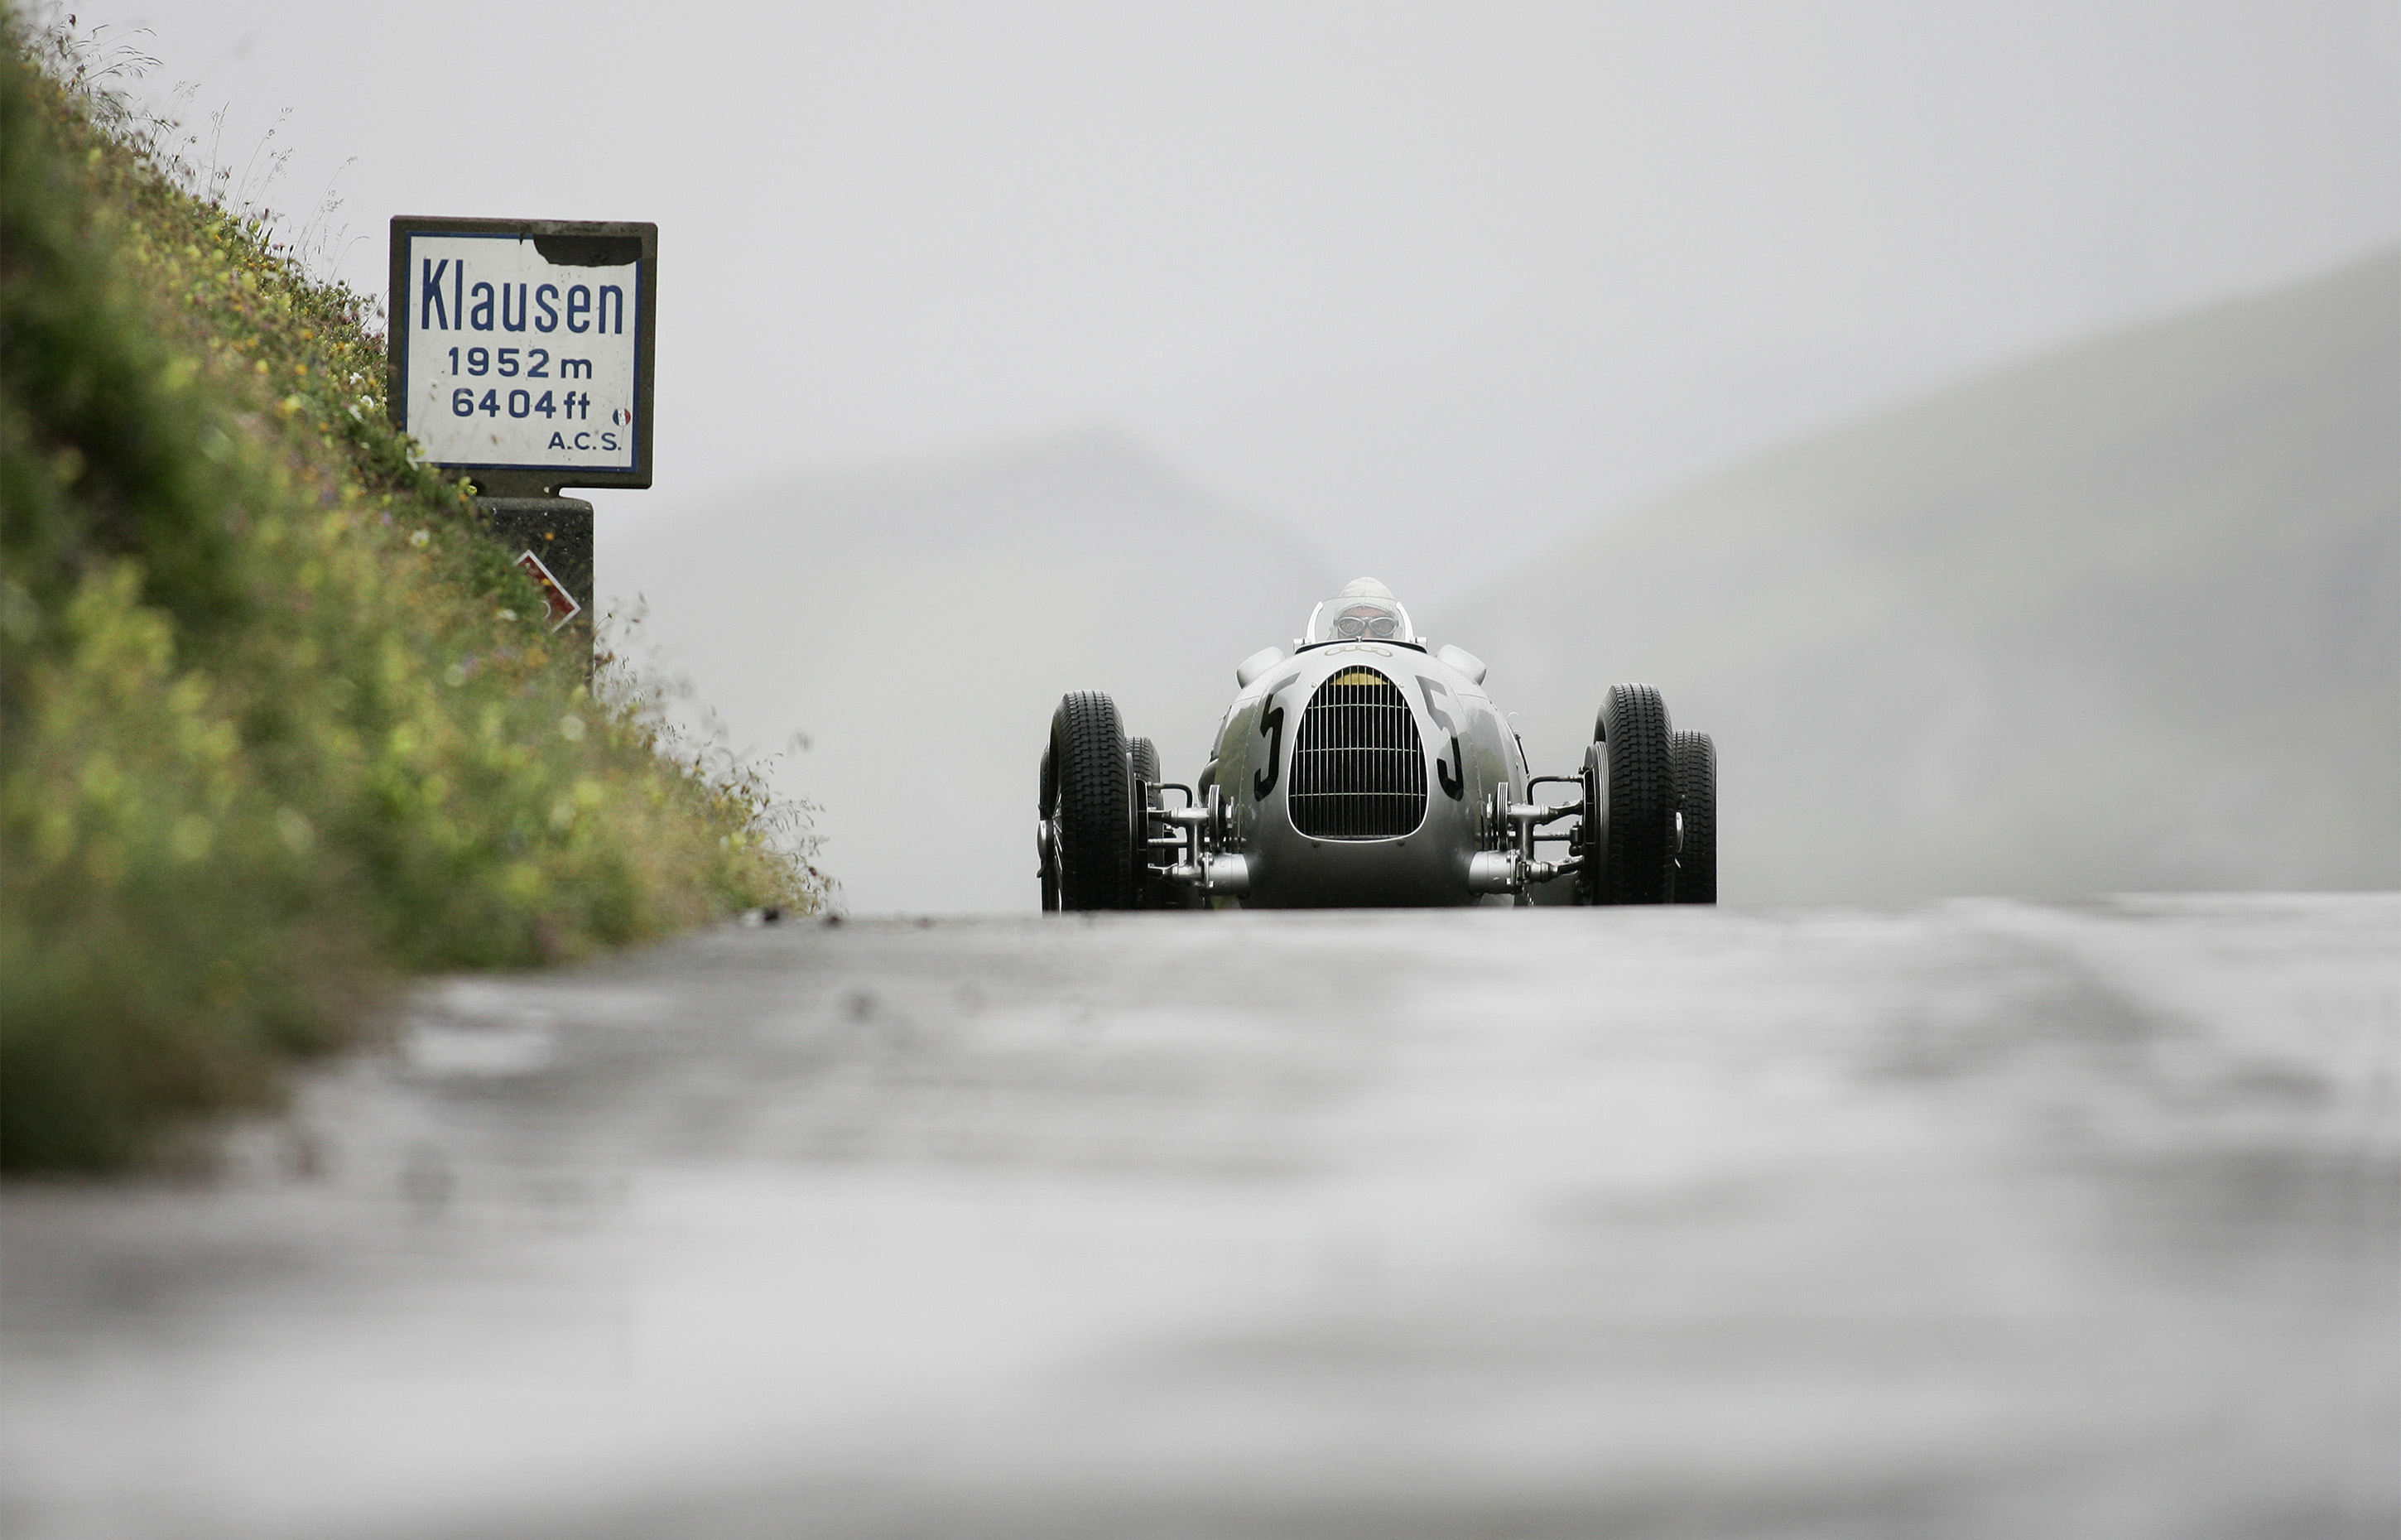 Klausen Pass, Switzerland - Classic 1937 Auto Union C-type races the Klausen Pass, Switzerland. The best racers in the world came together every year from 1922 to 1934 to race the Klausen Pass. Past performances by historic racers included Caracciola, Stuck, Nuvolari, and Chiron.